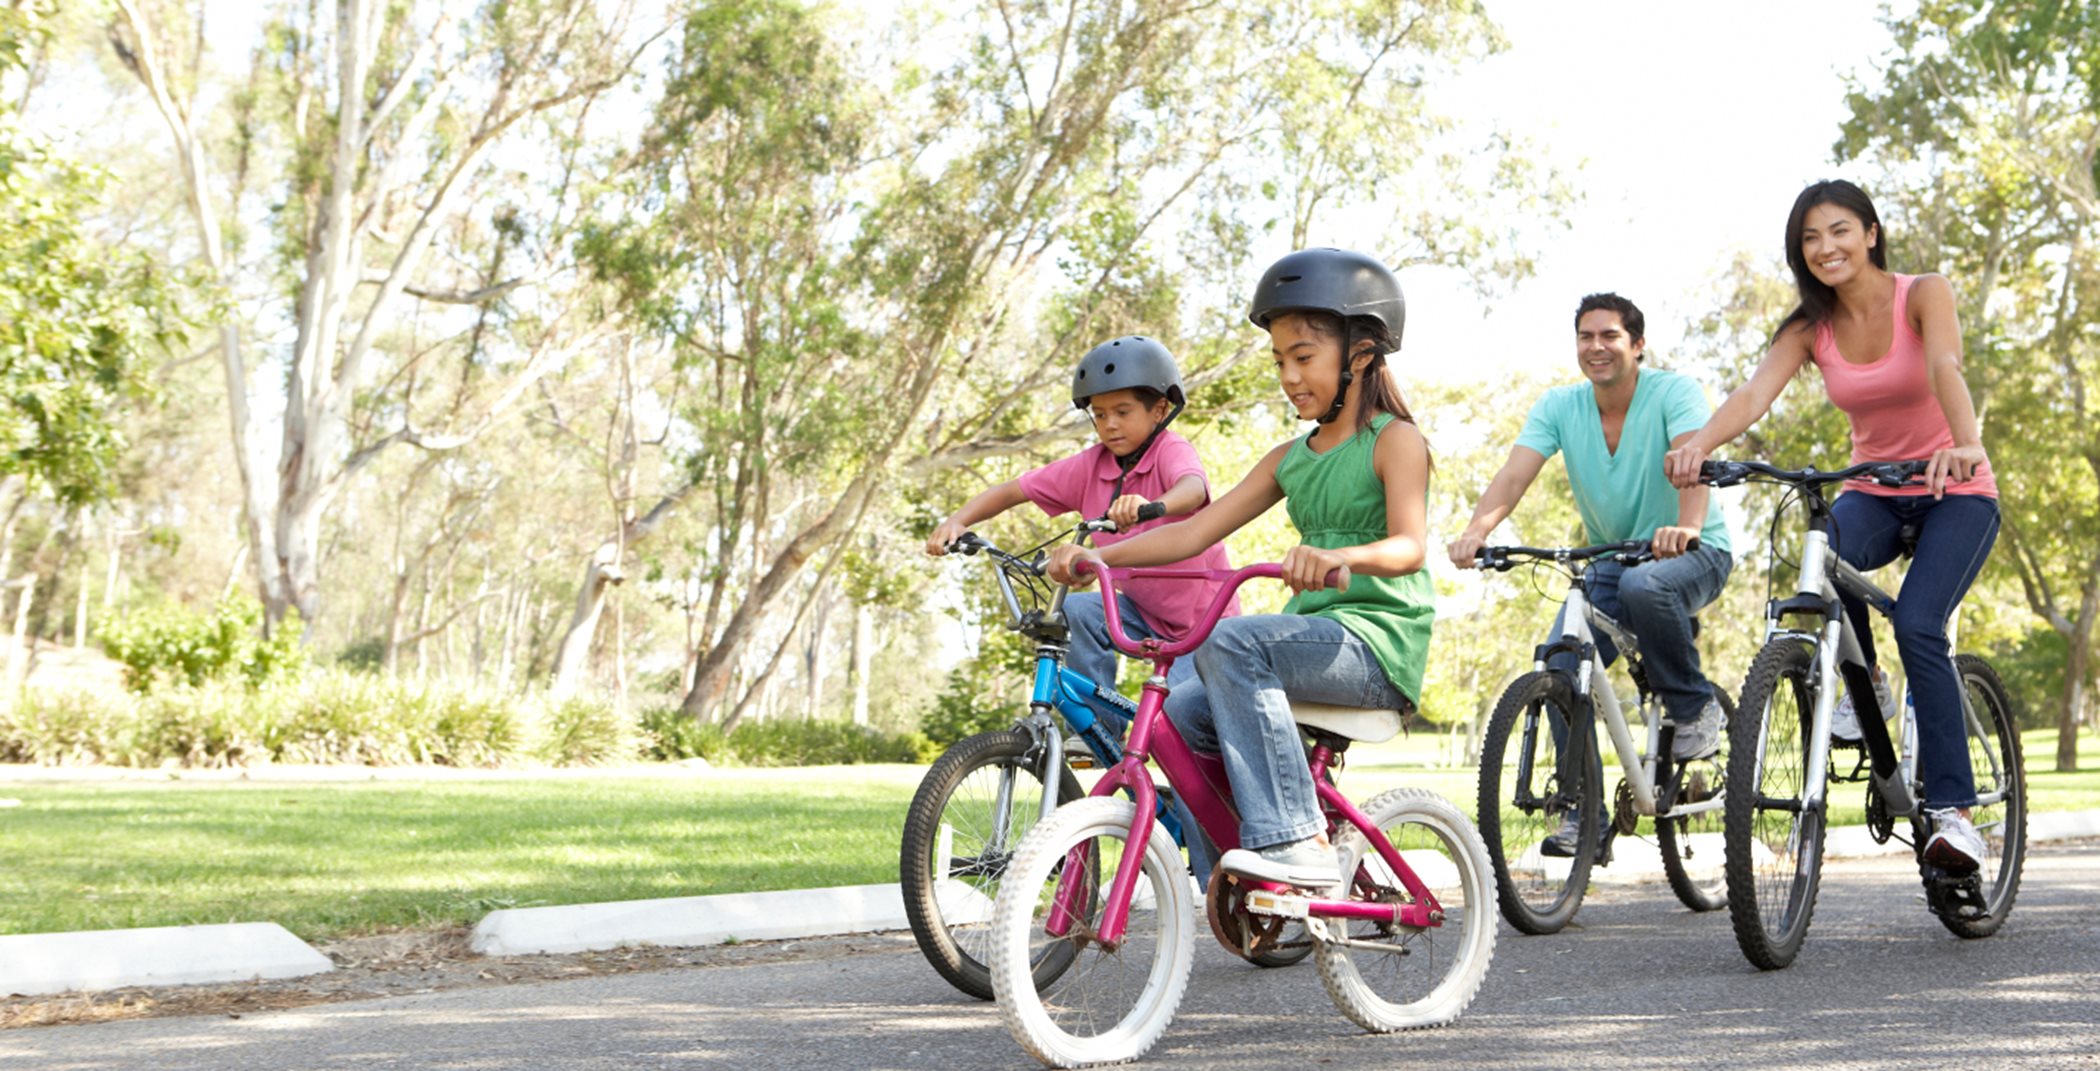 A family riding their bikes together